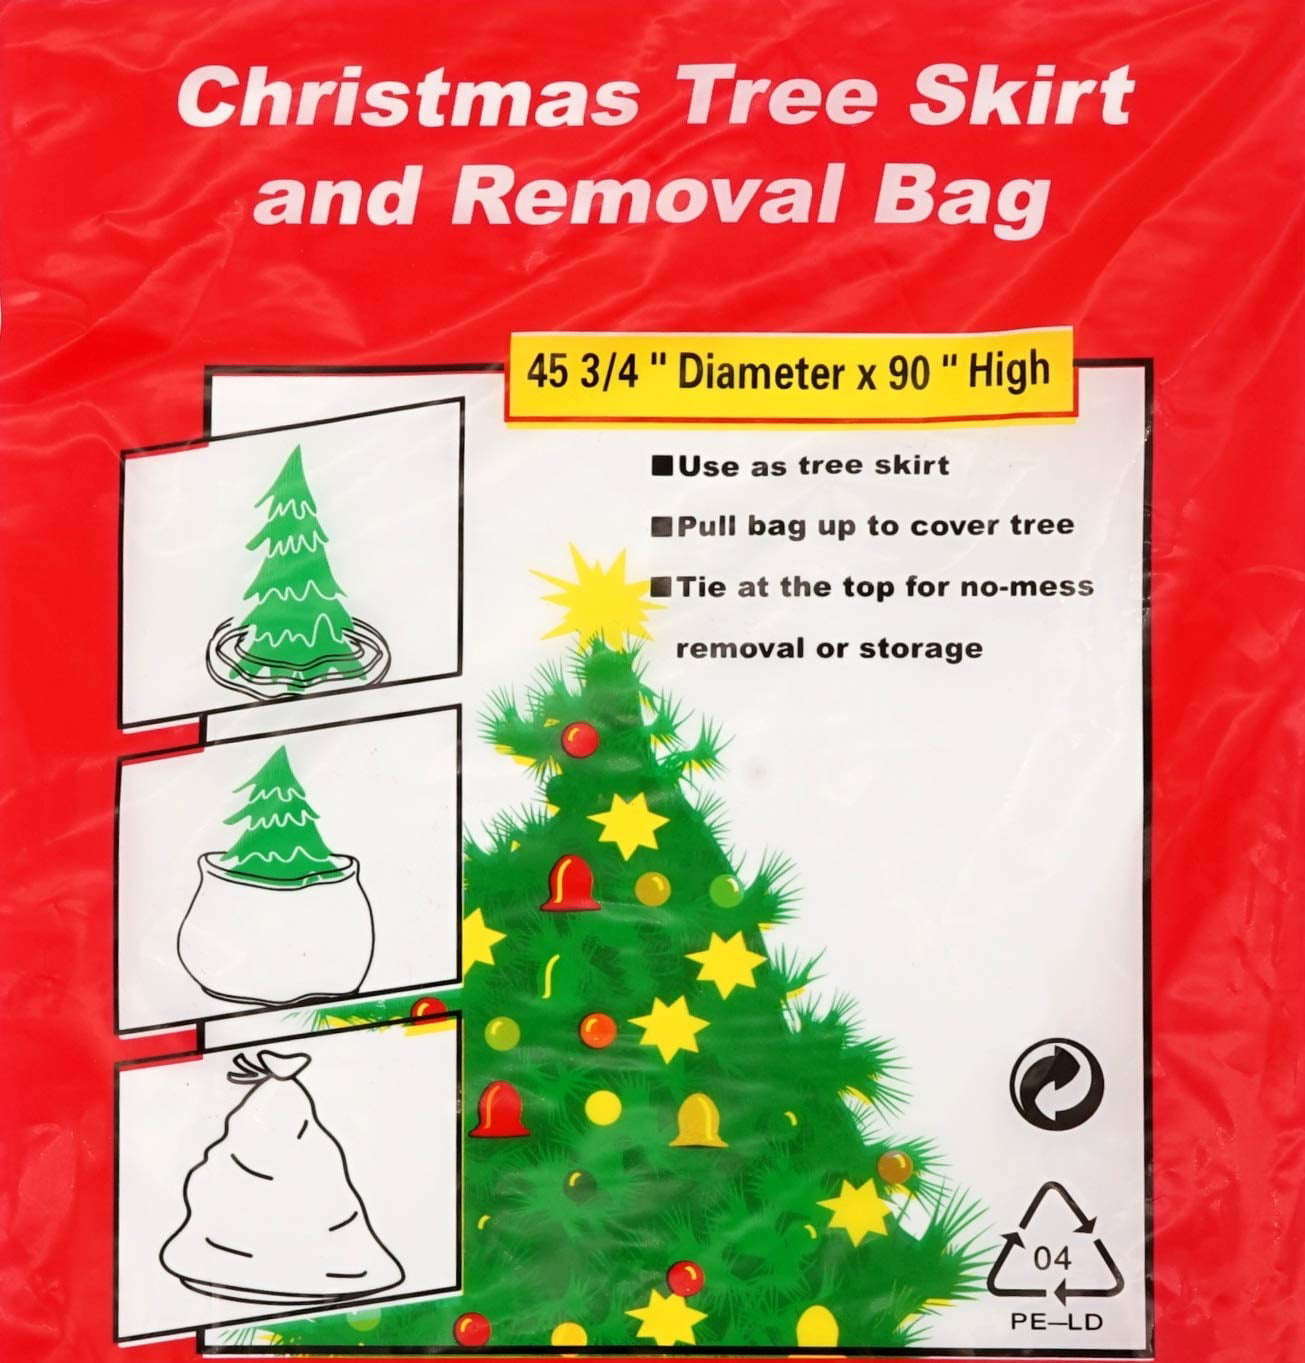 2 Trash Bags, Red, White 96 x 47 Inch Removal and Storage Bags for Trees up to 7 Feet Tall Christmas Tree Disposal Bag 